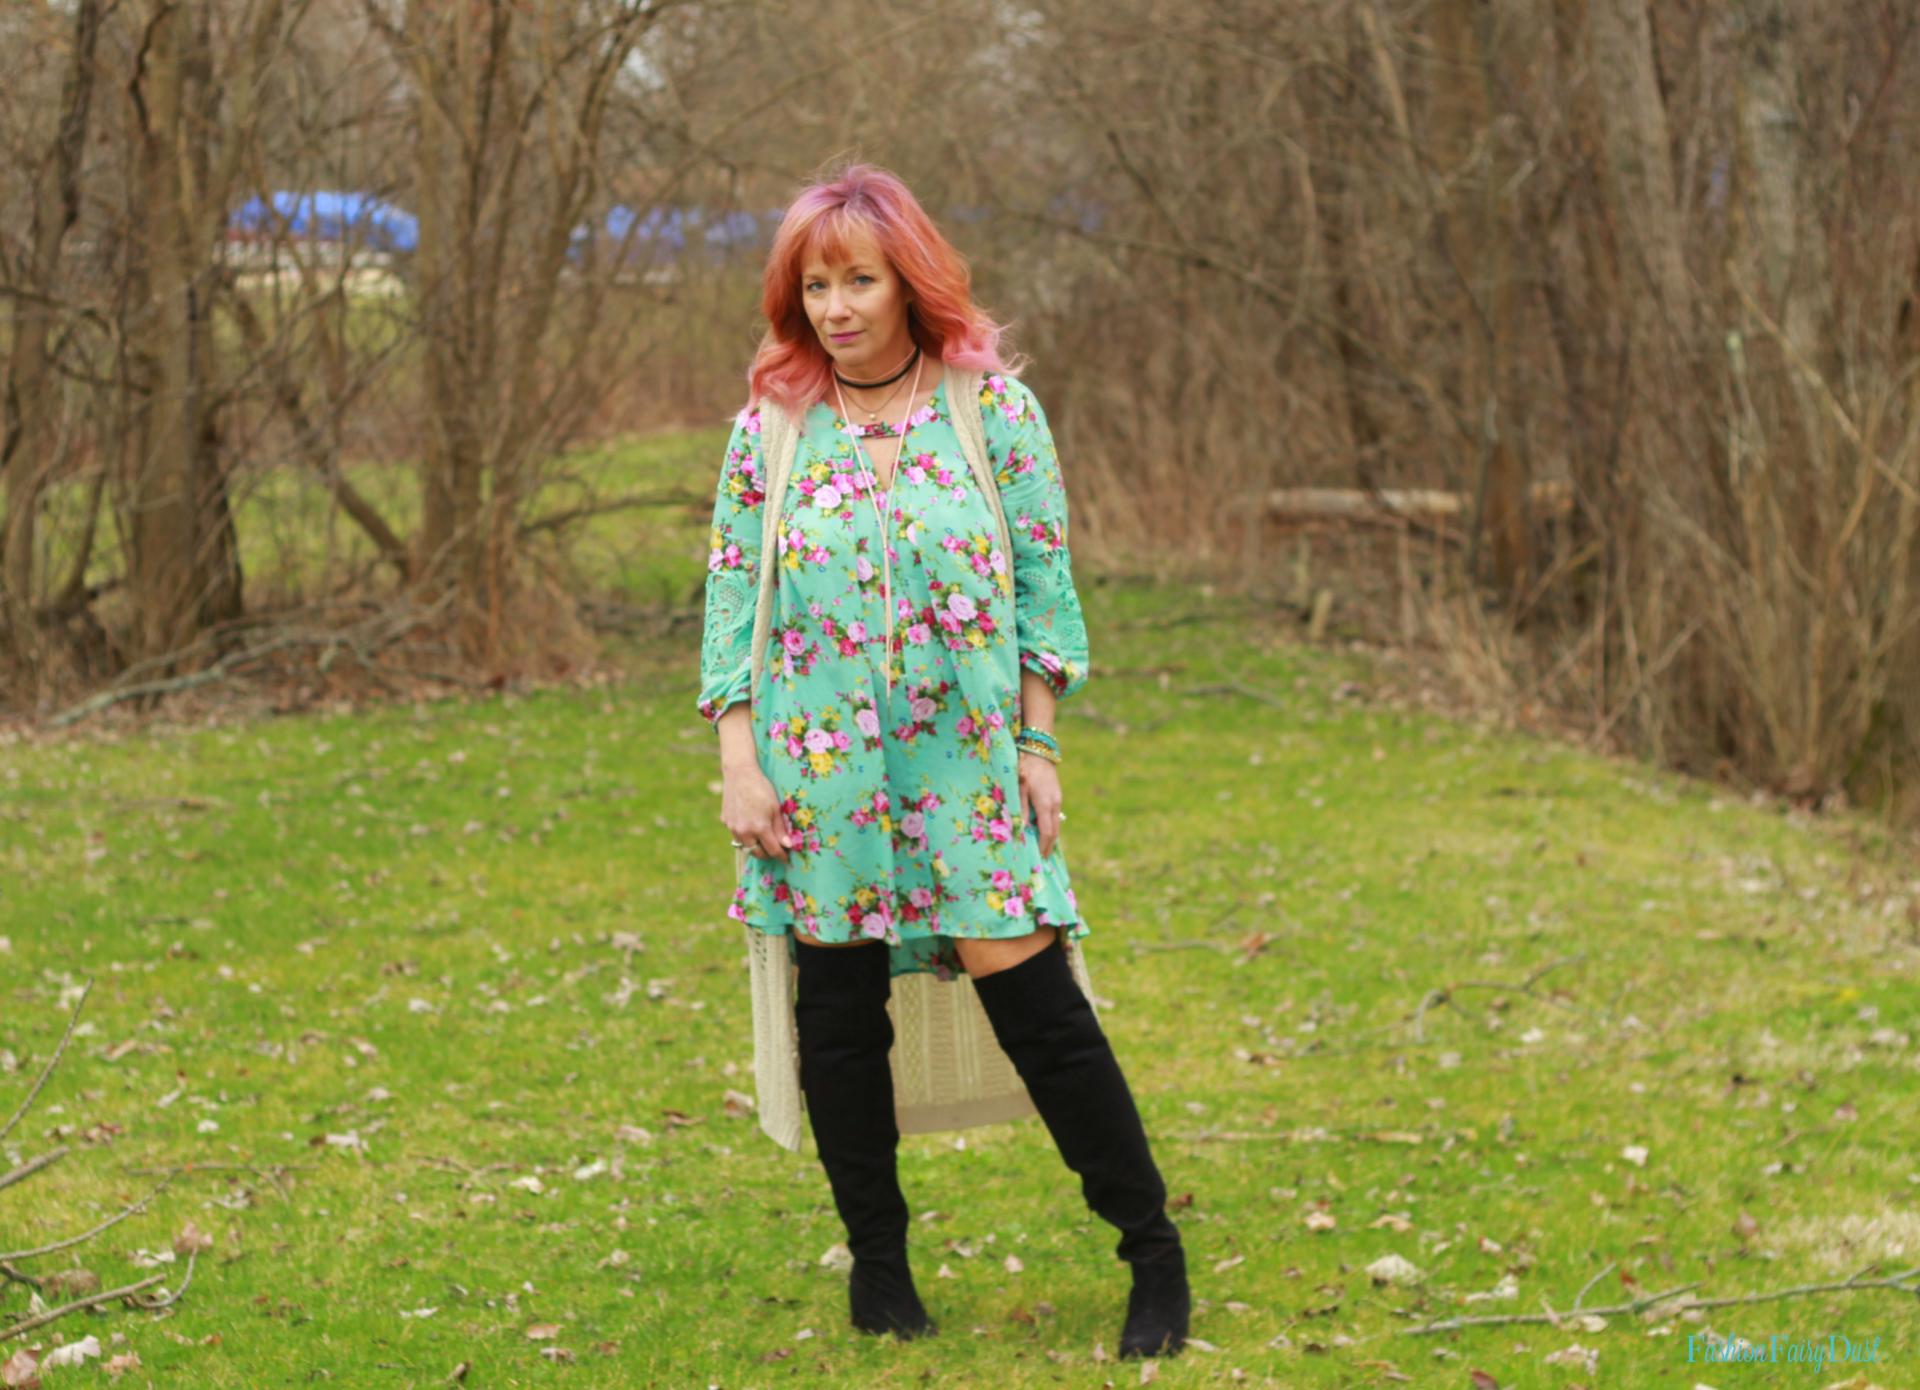 Turquoise floral tunic, long vest and over the knee boots. Styling a warm weather dress for cooler weather.